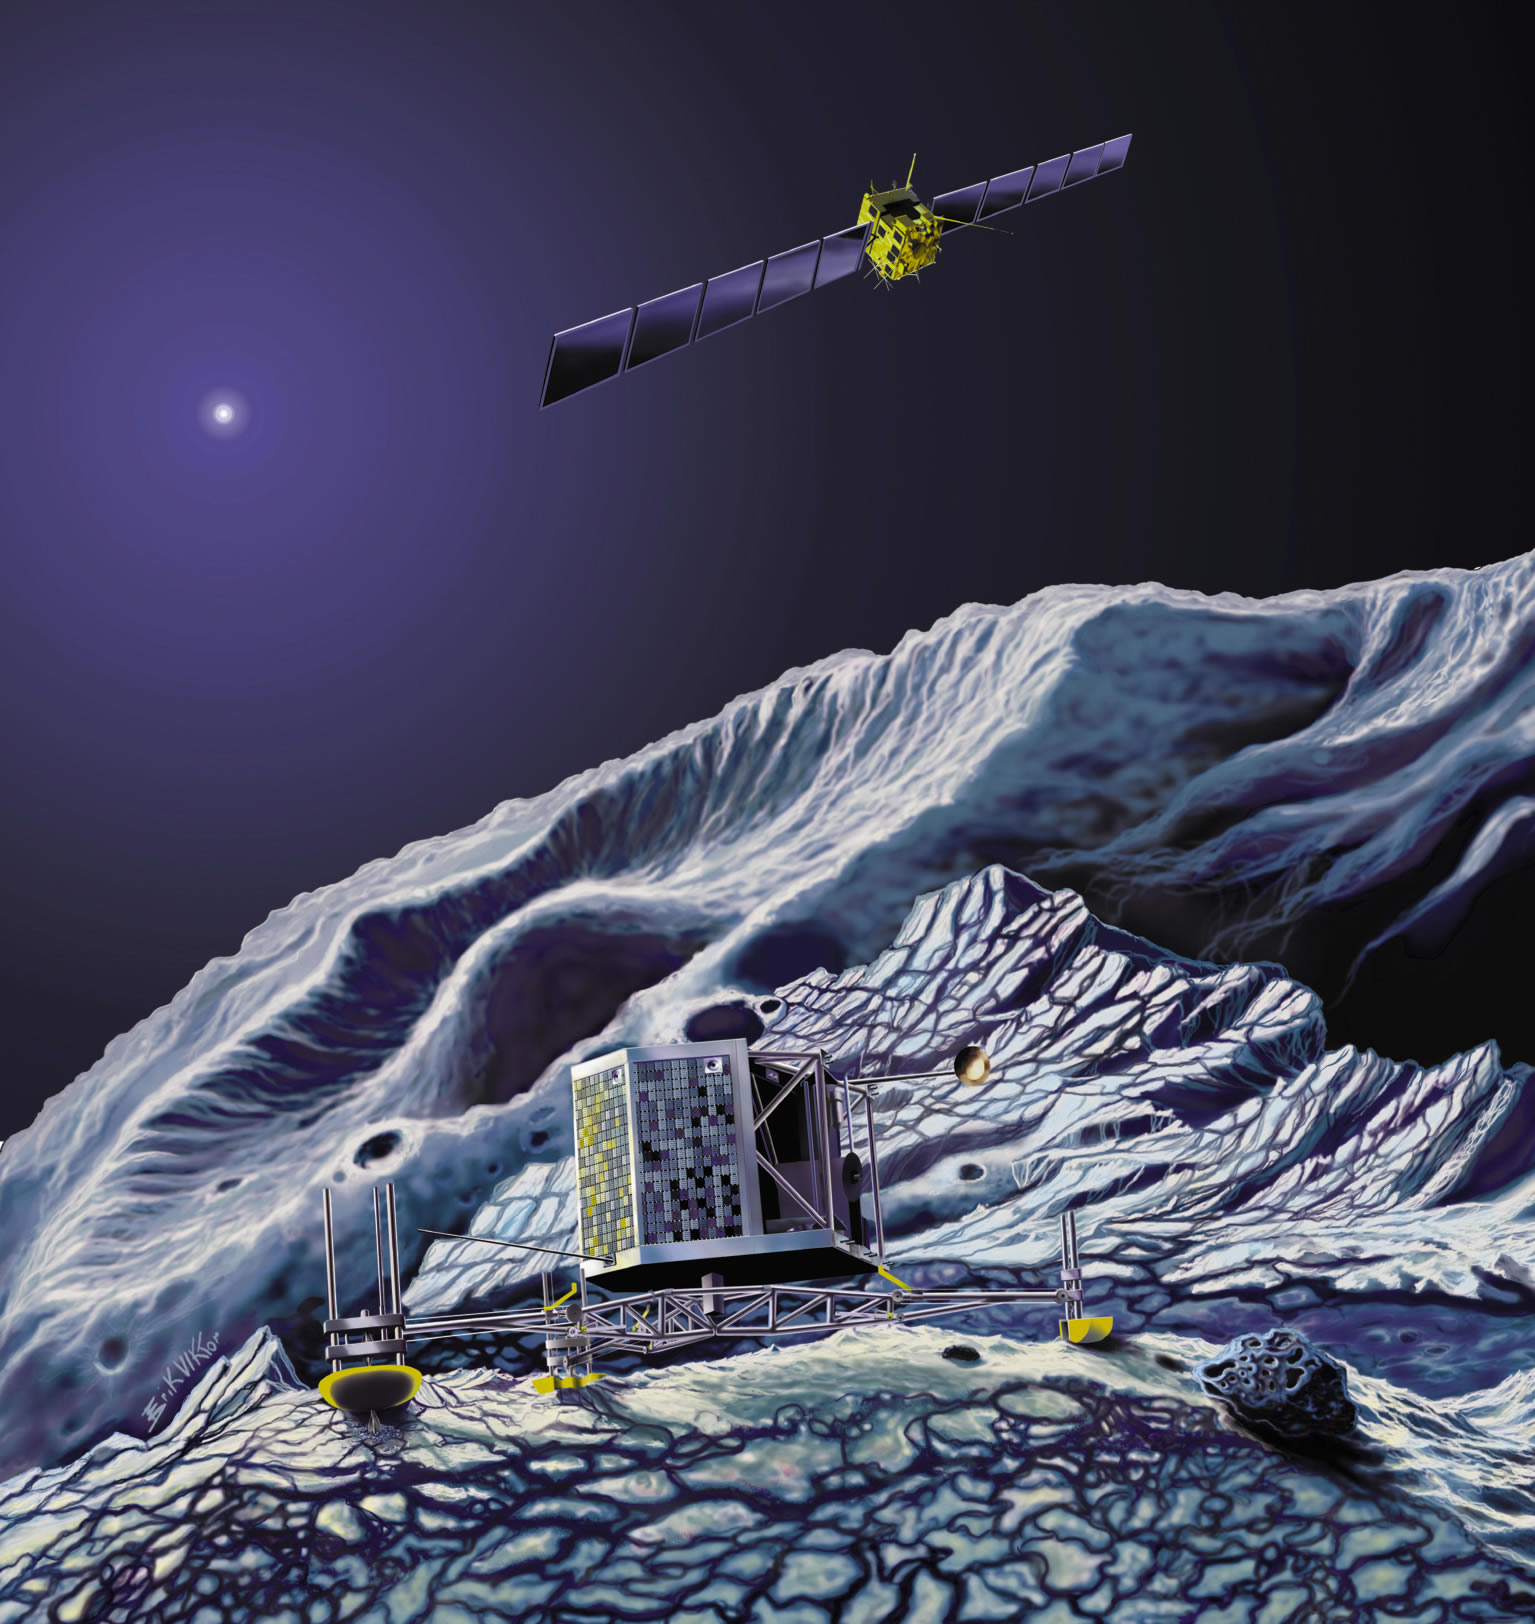 Artist's impression of the Philae landing craft, anchored by harpoons and drills to the comet's surface